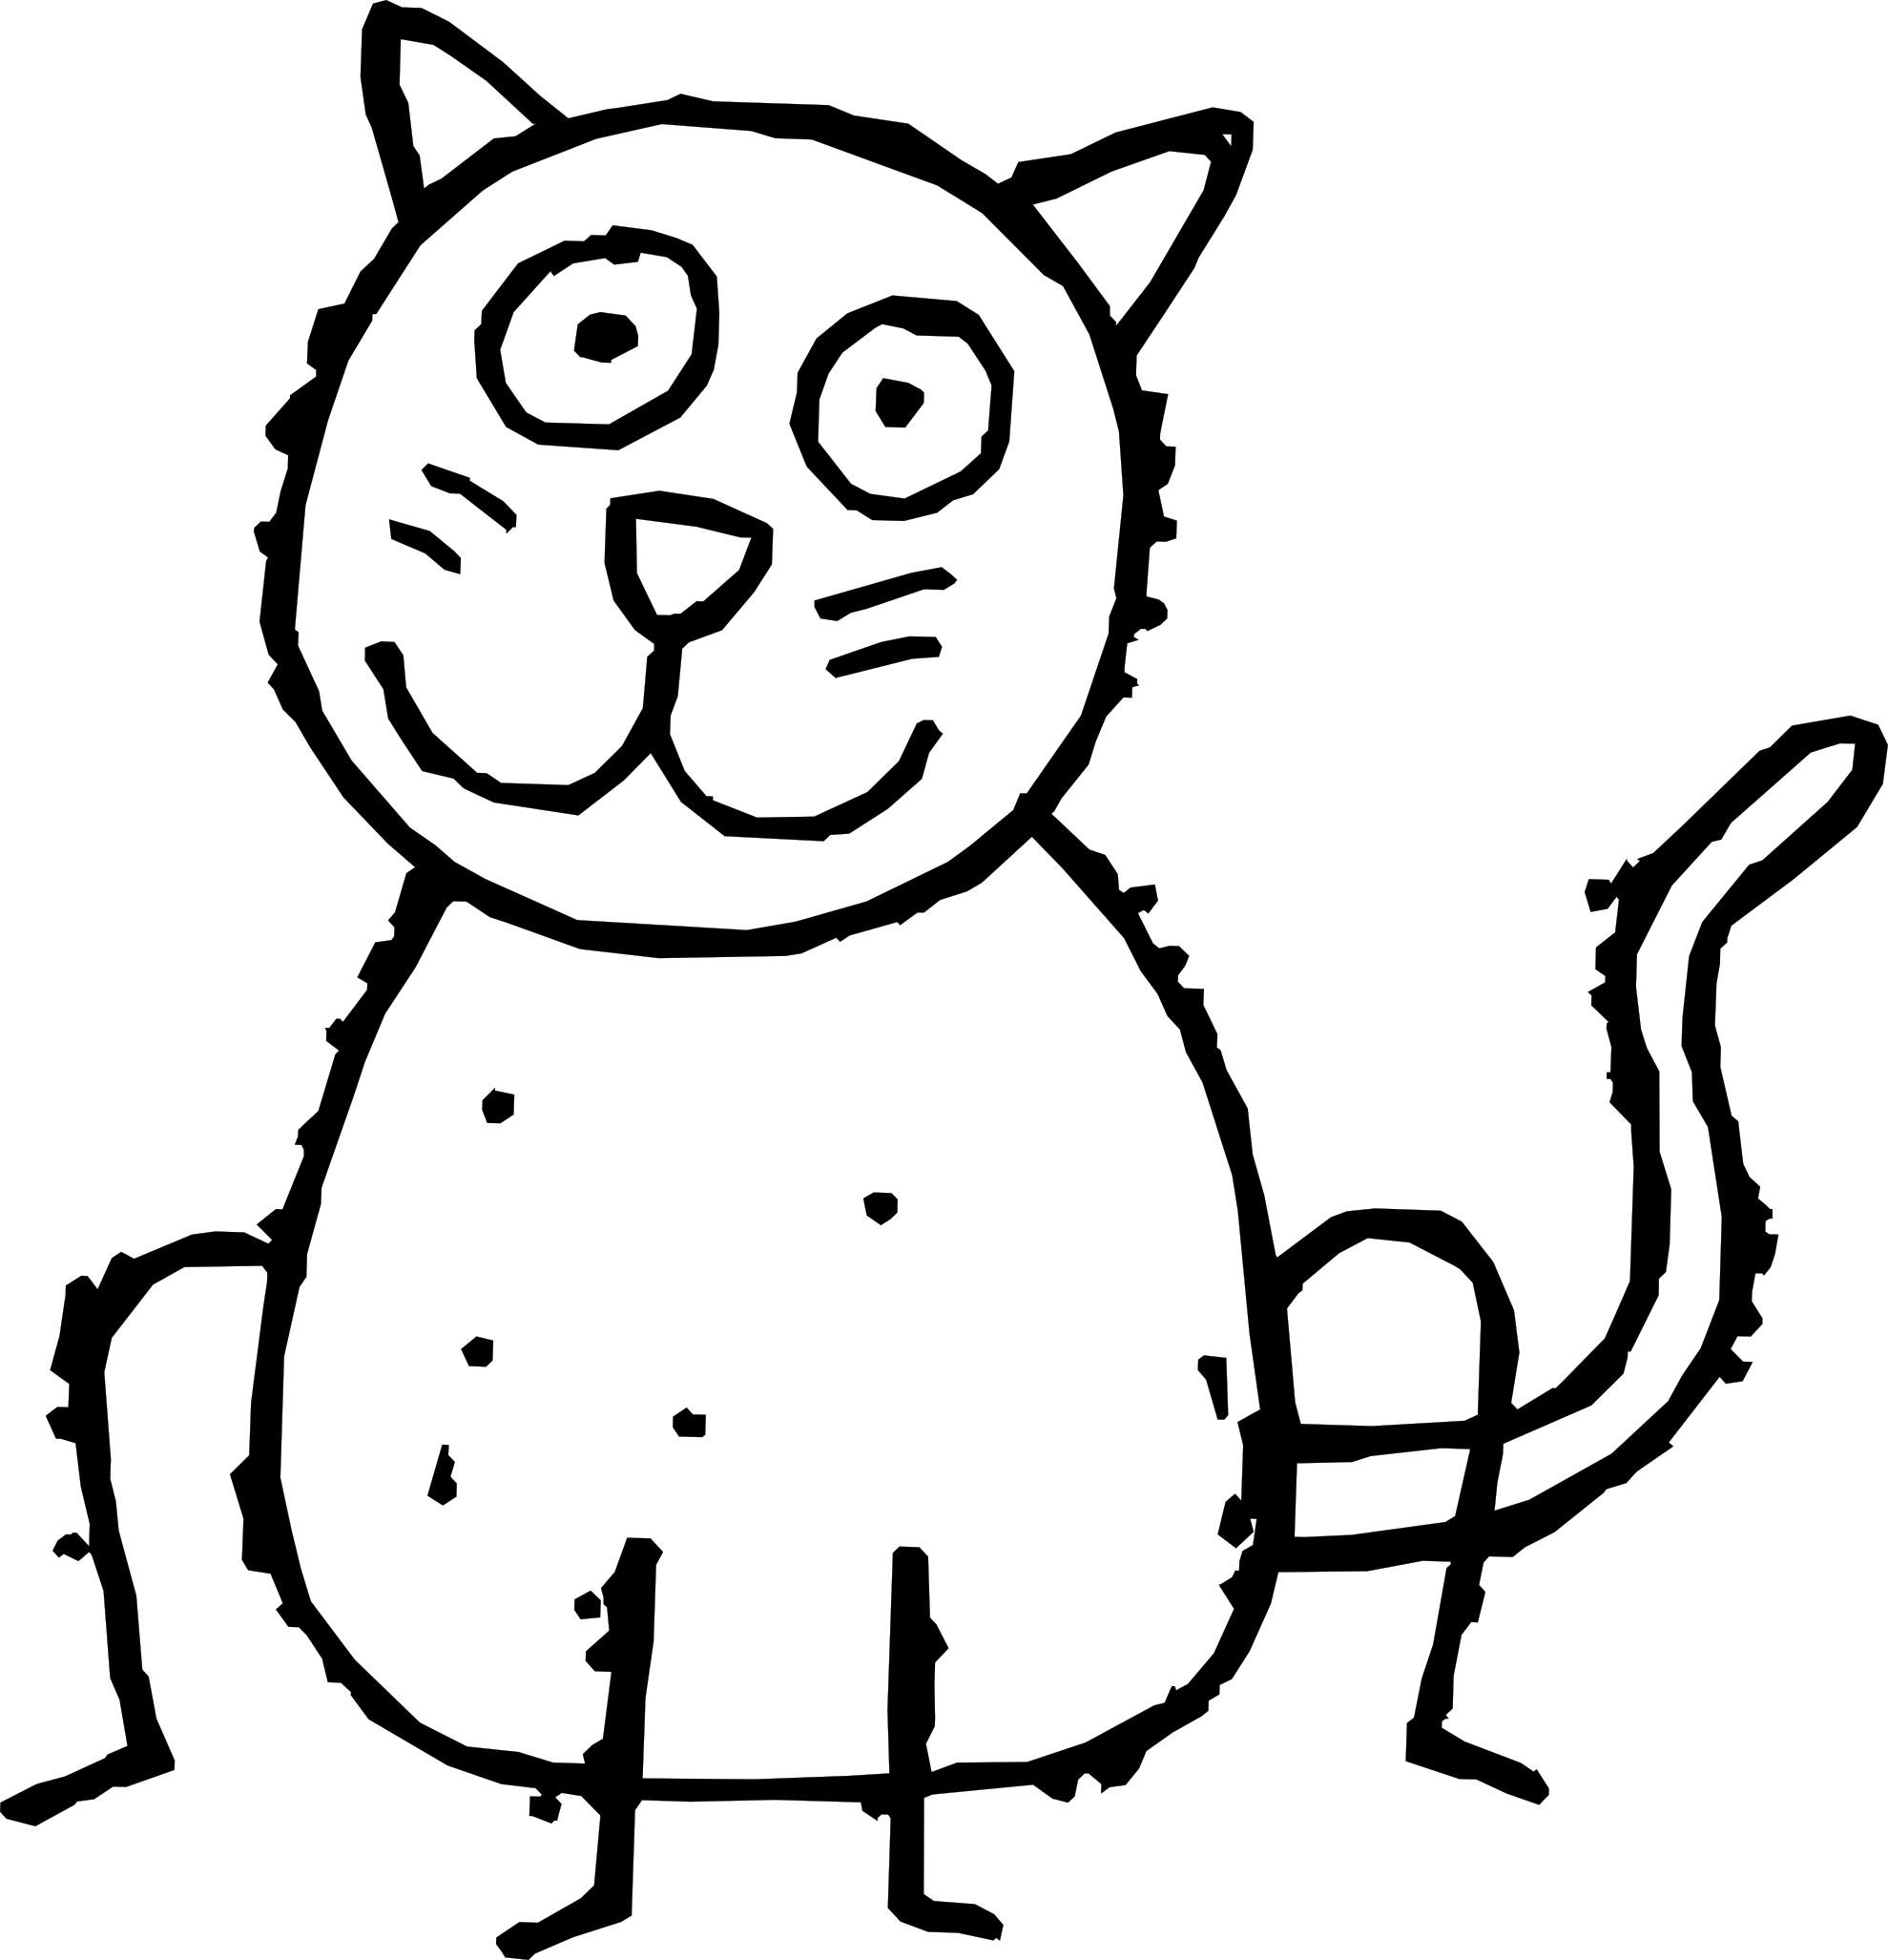 clip art line drawing of a cat - photo #12